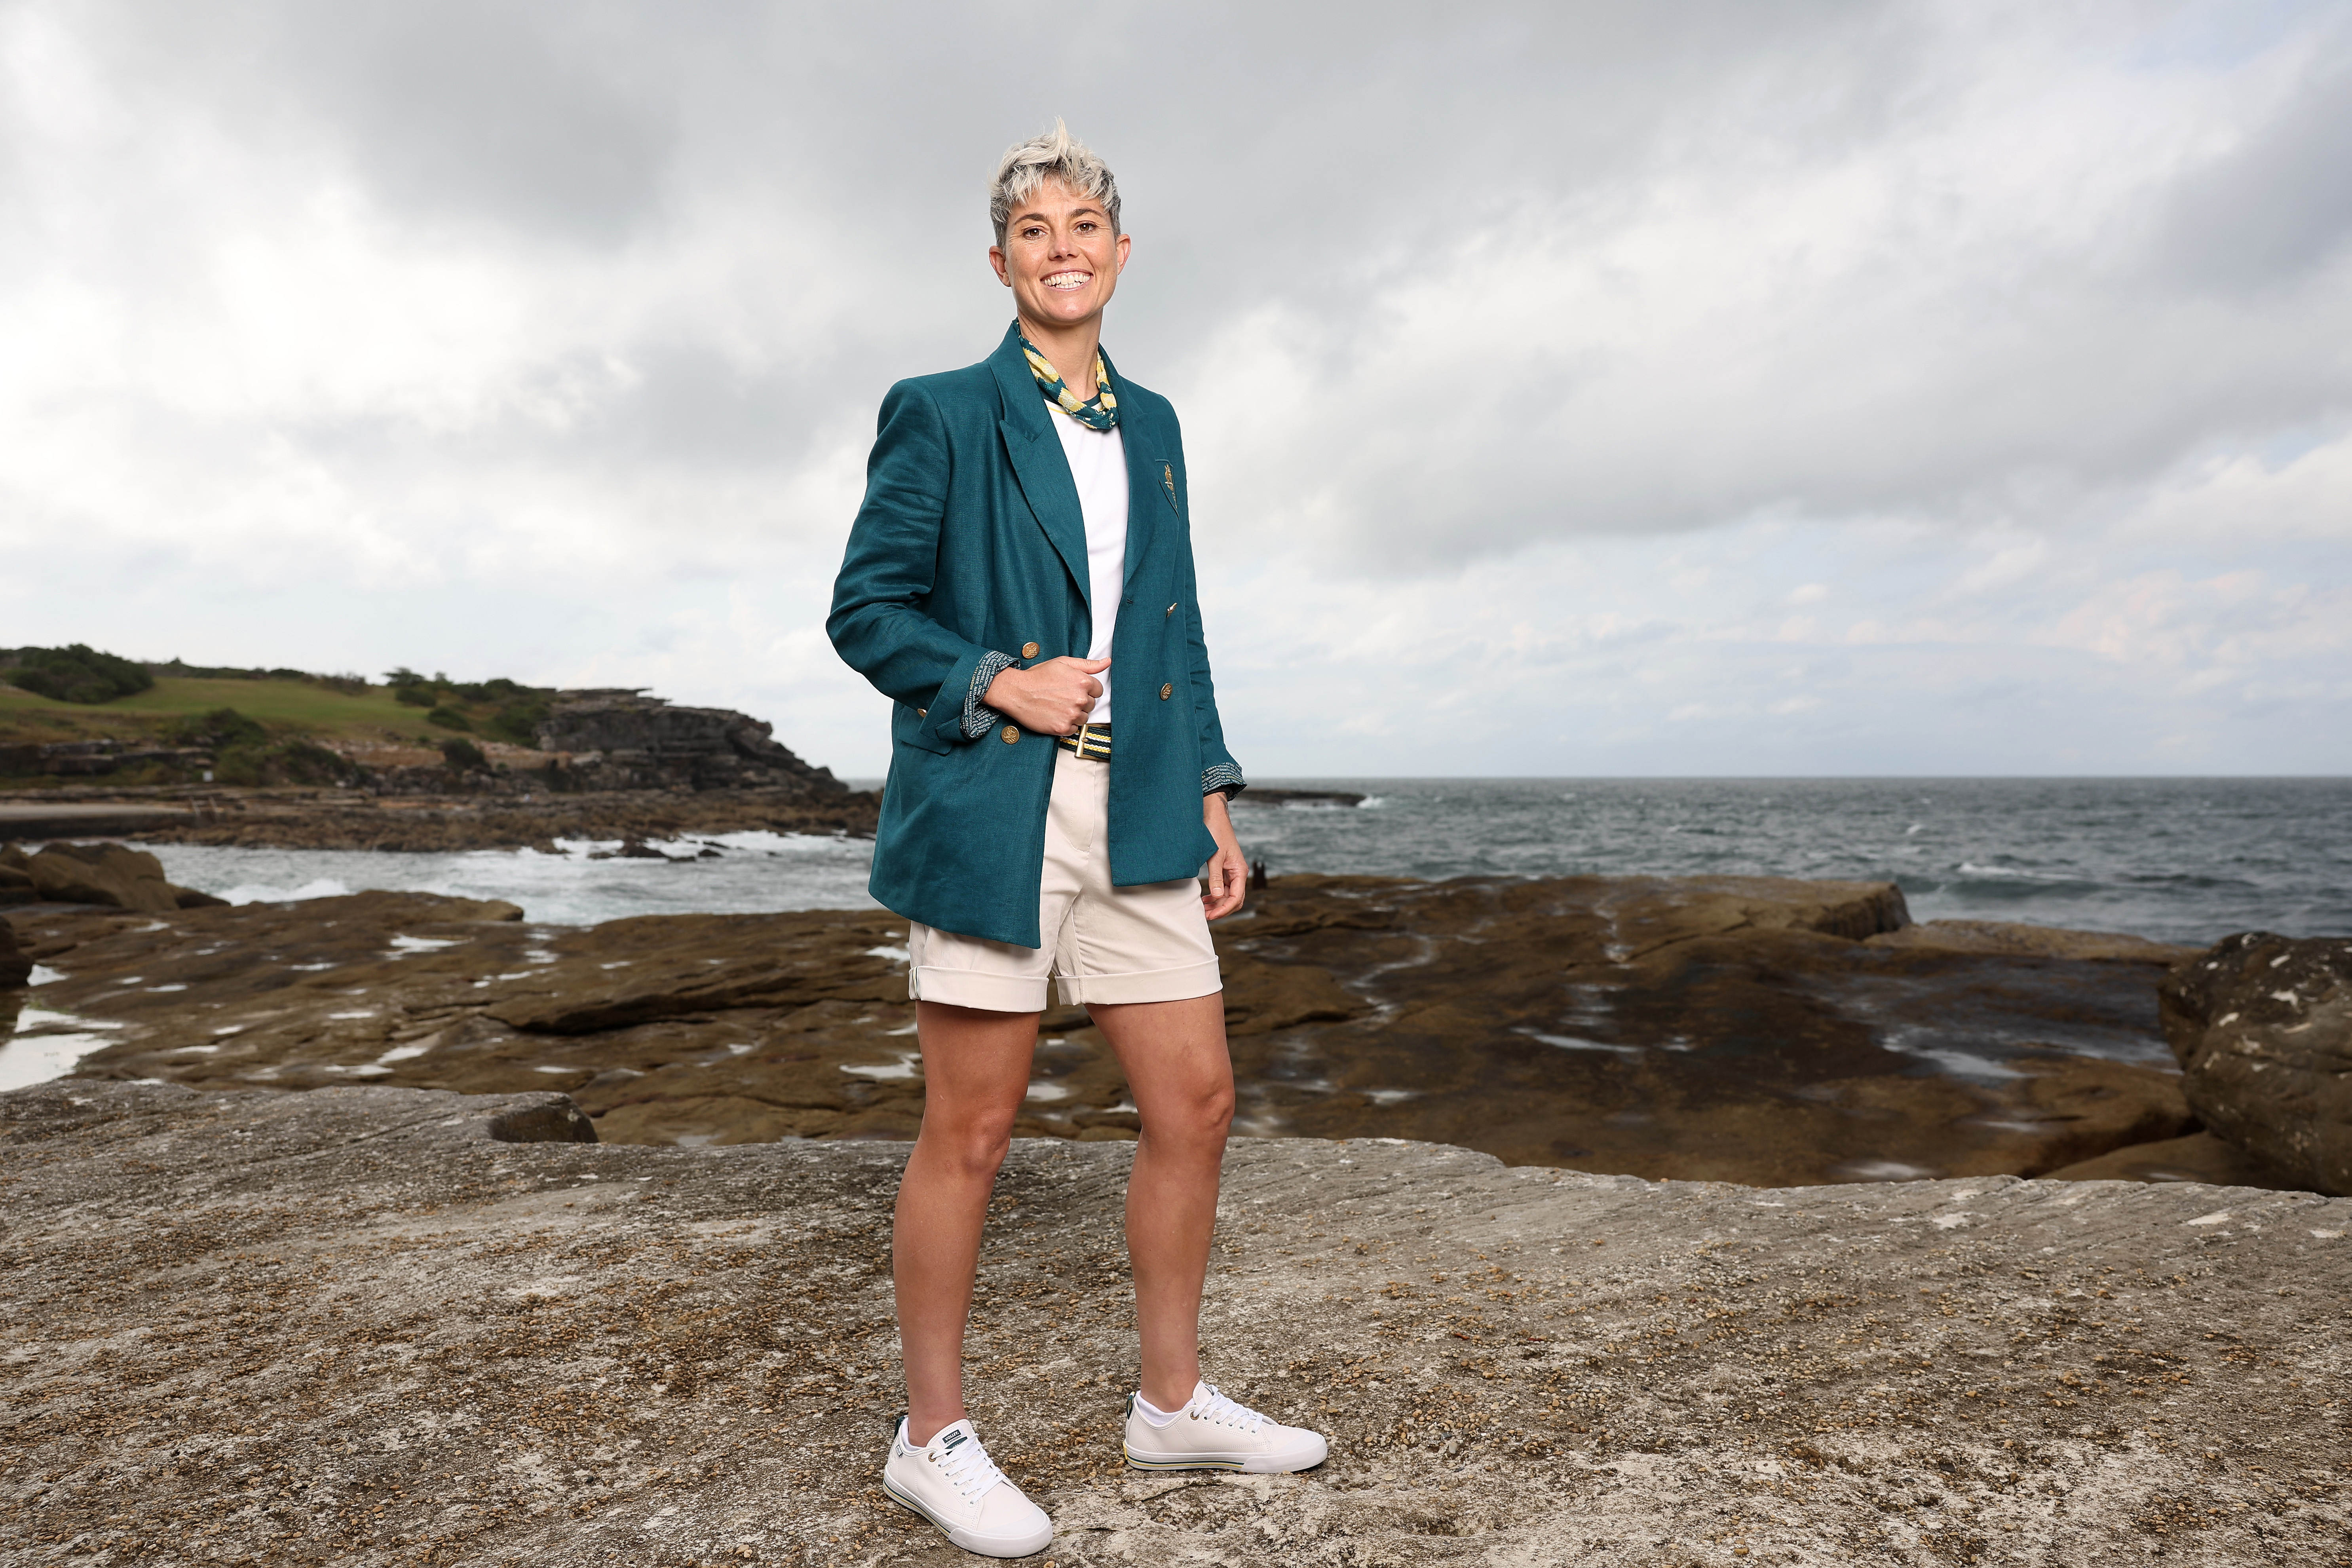 Michelle Heyman poses during the uniform launch at Clovelly Surf Club.